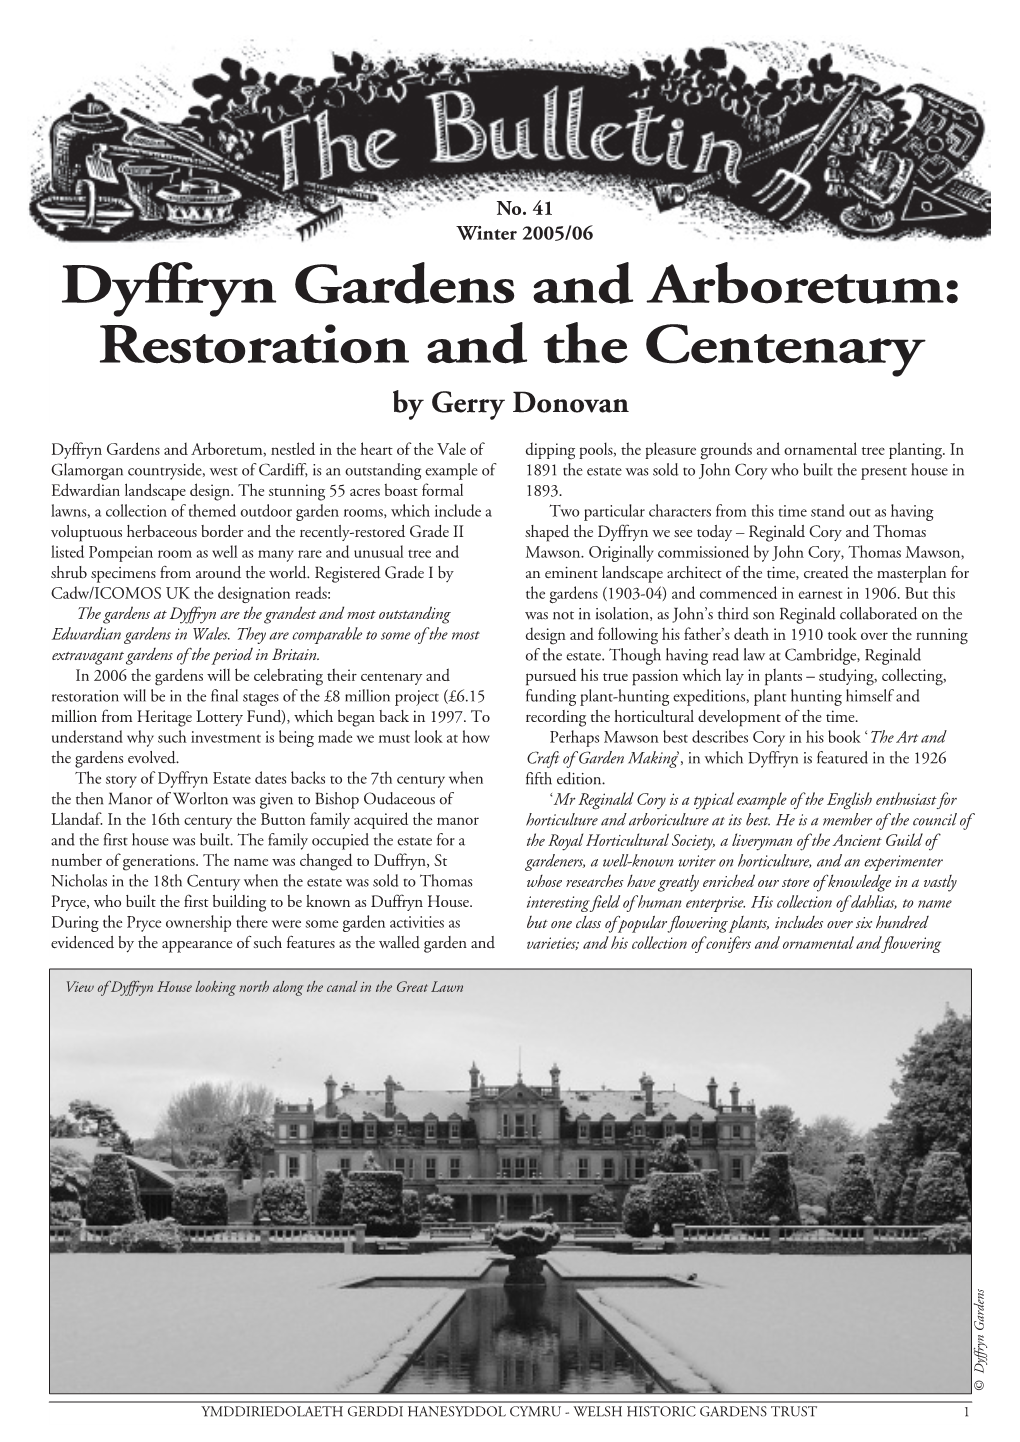 Dyffryn Gardens and Arboretum: Restoration and the Centenary by Gerry Donovan